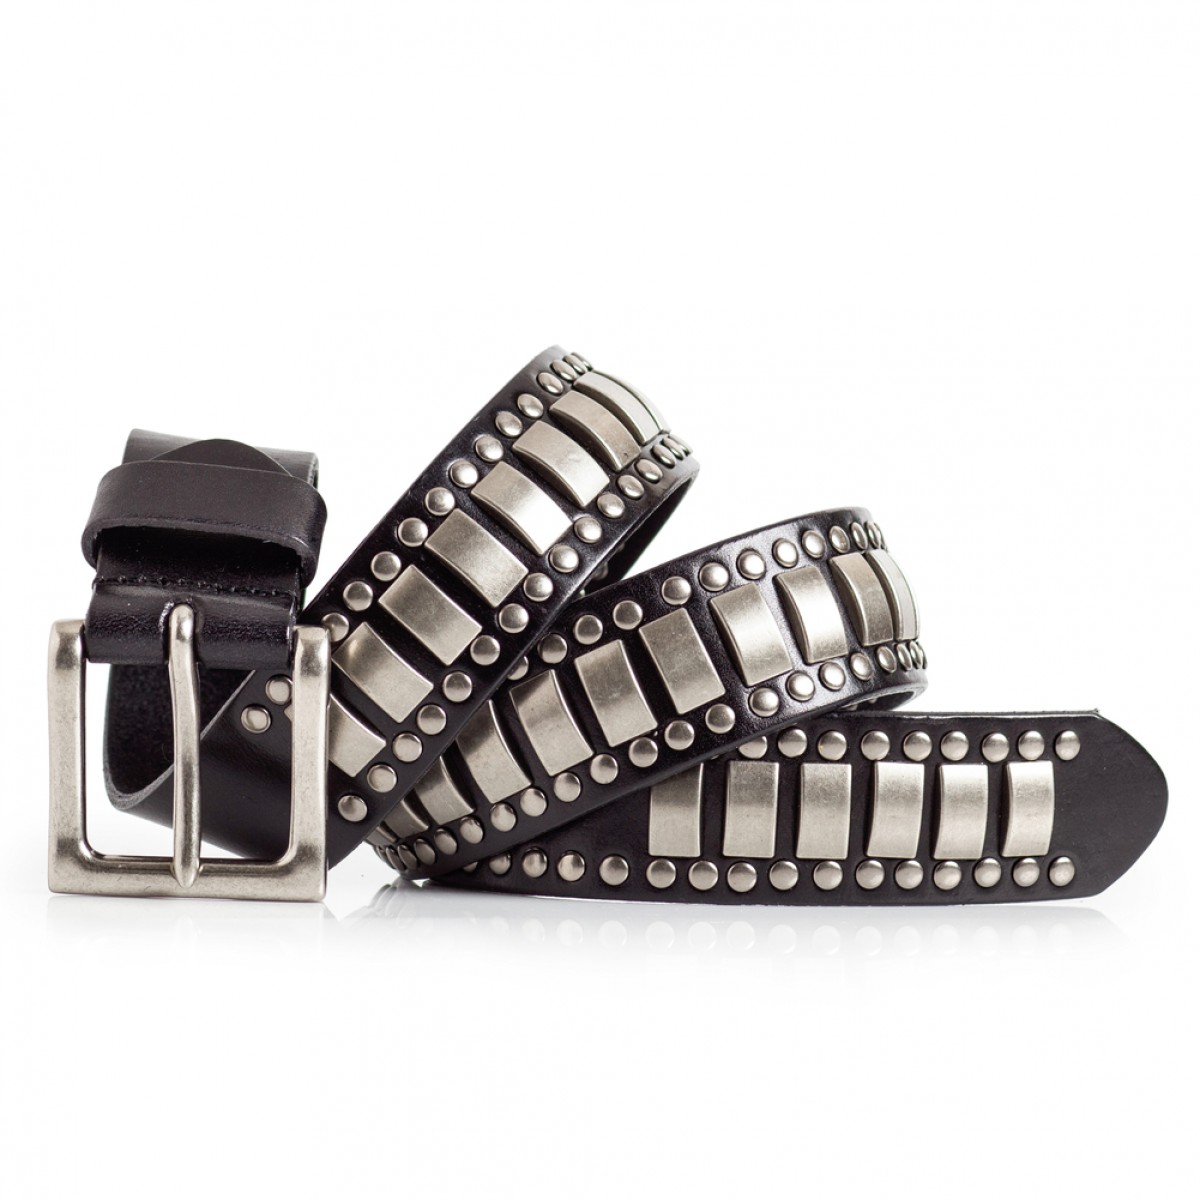 Stylish Black Leather Belt with Studs Sizes 30-44in | LATICCI